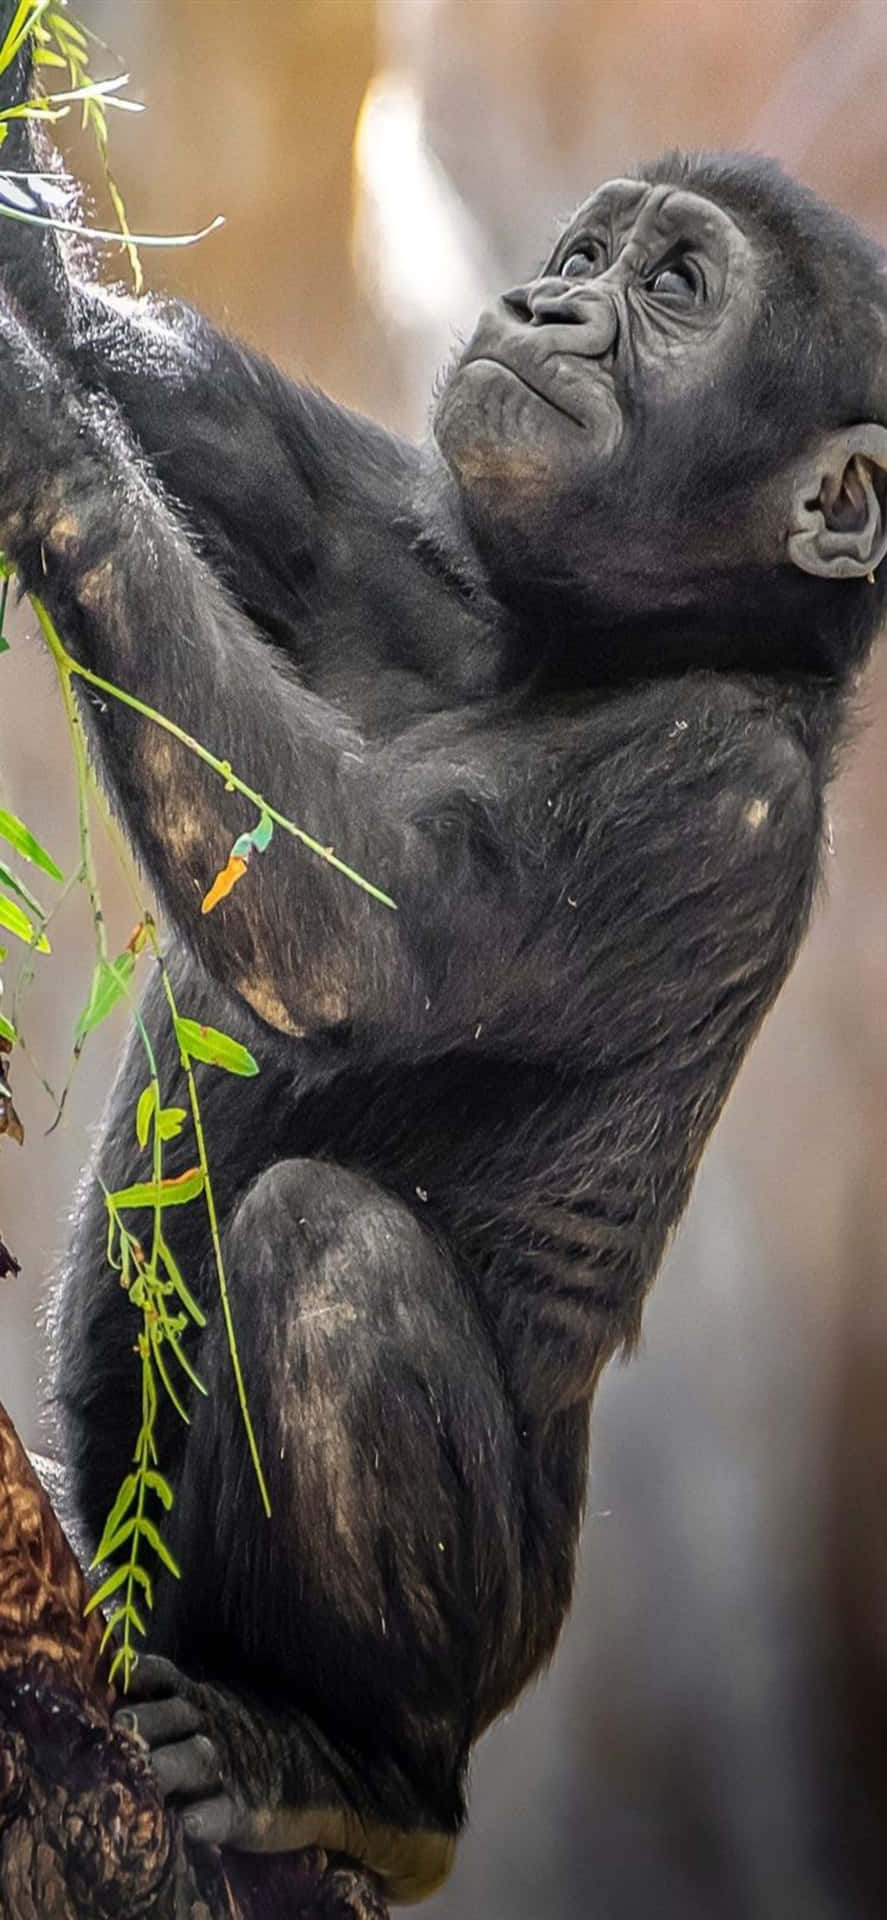 A Baby Gorilla Is Climbing On A Branch